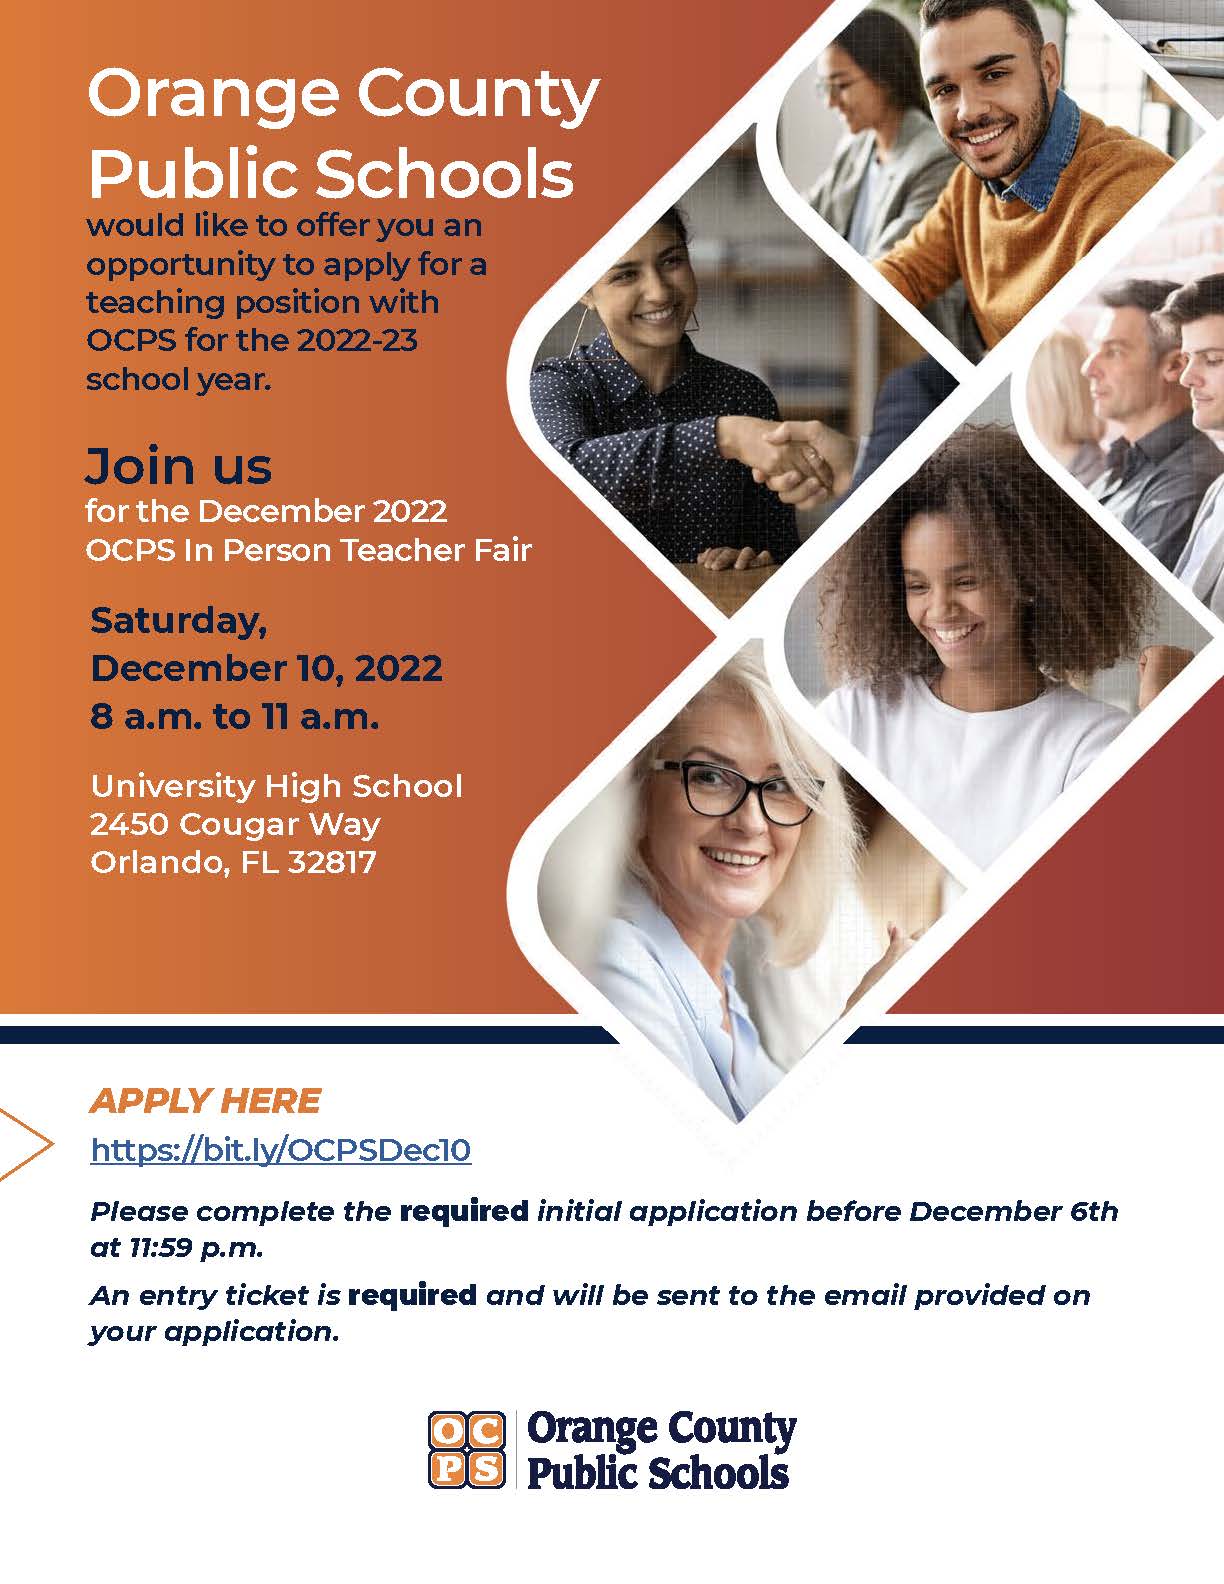 A flyer for teaching position at Orange County Public Schools. The flyer has a URL for application.